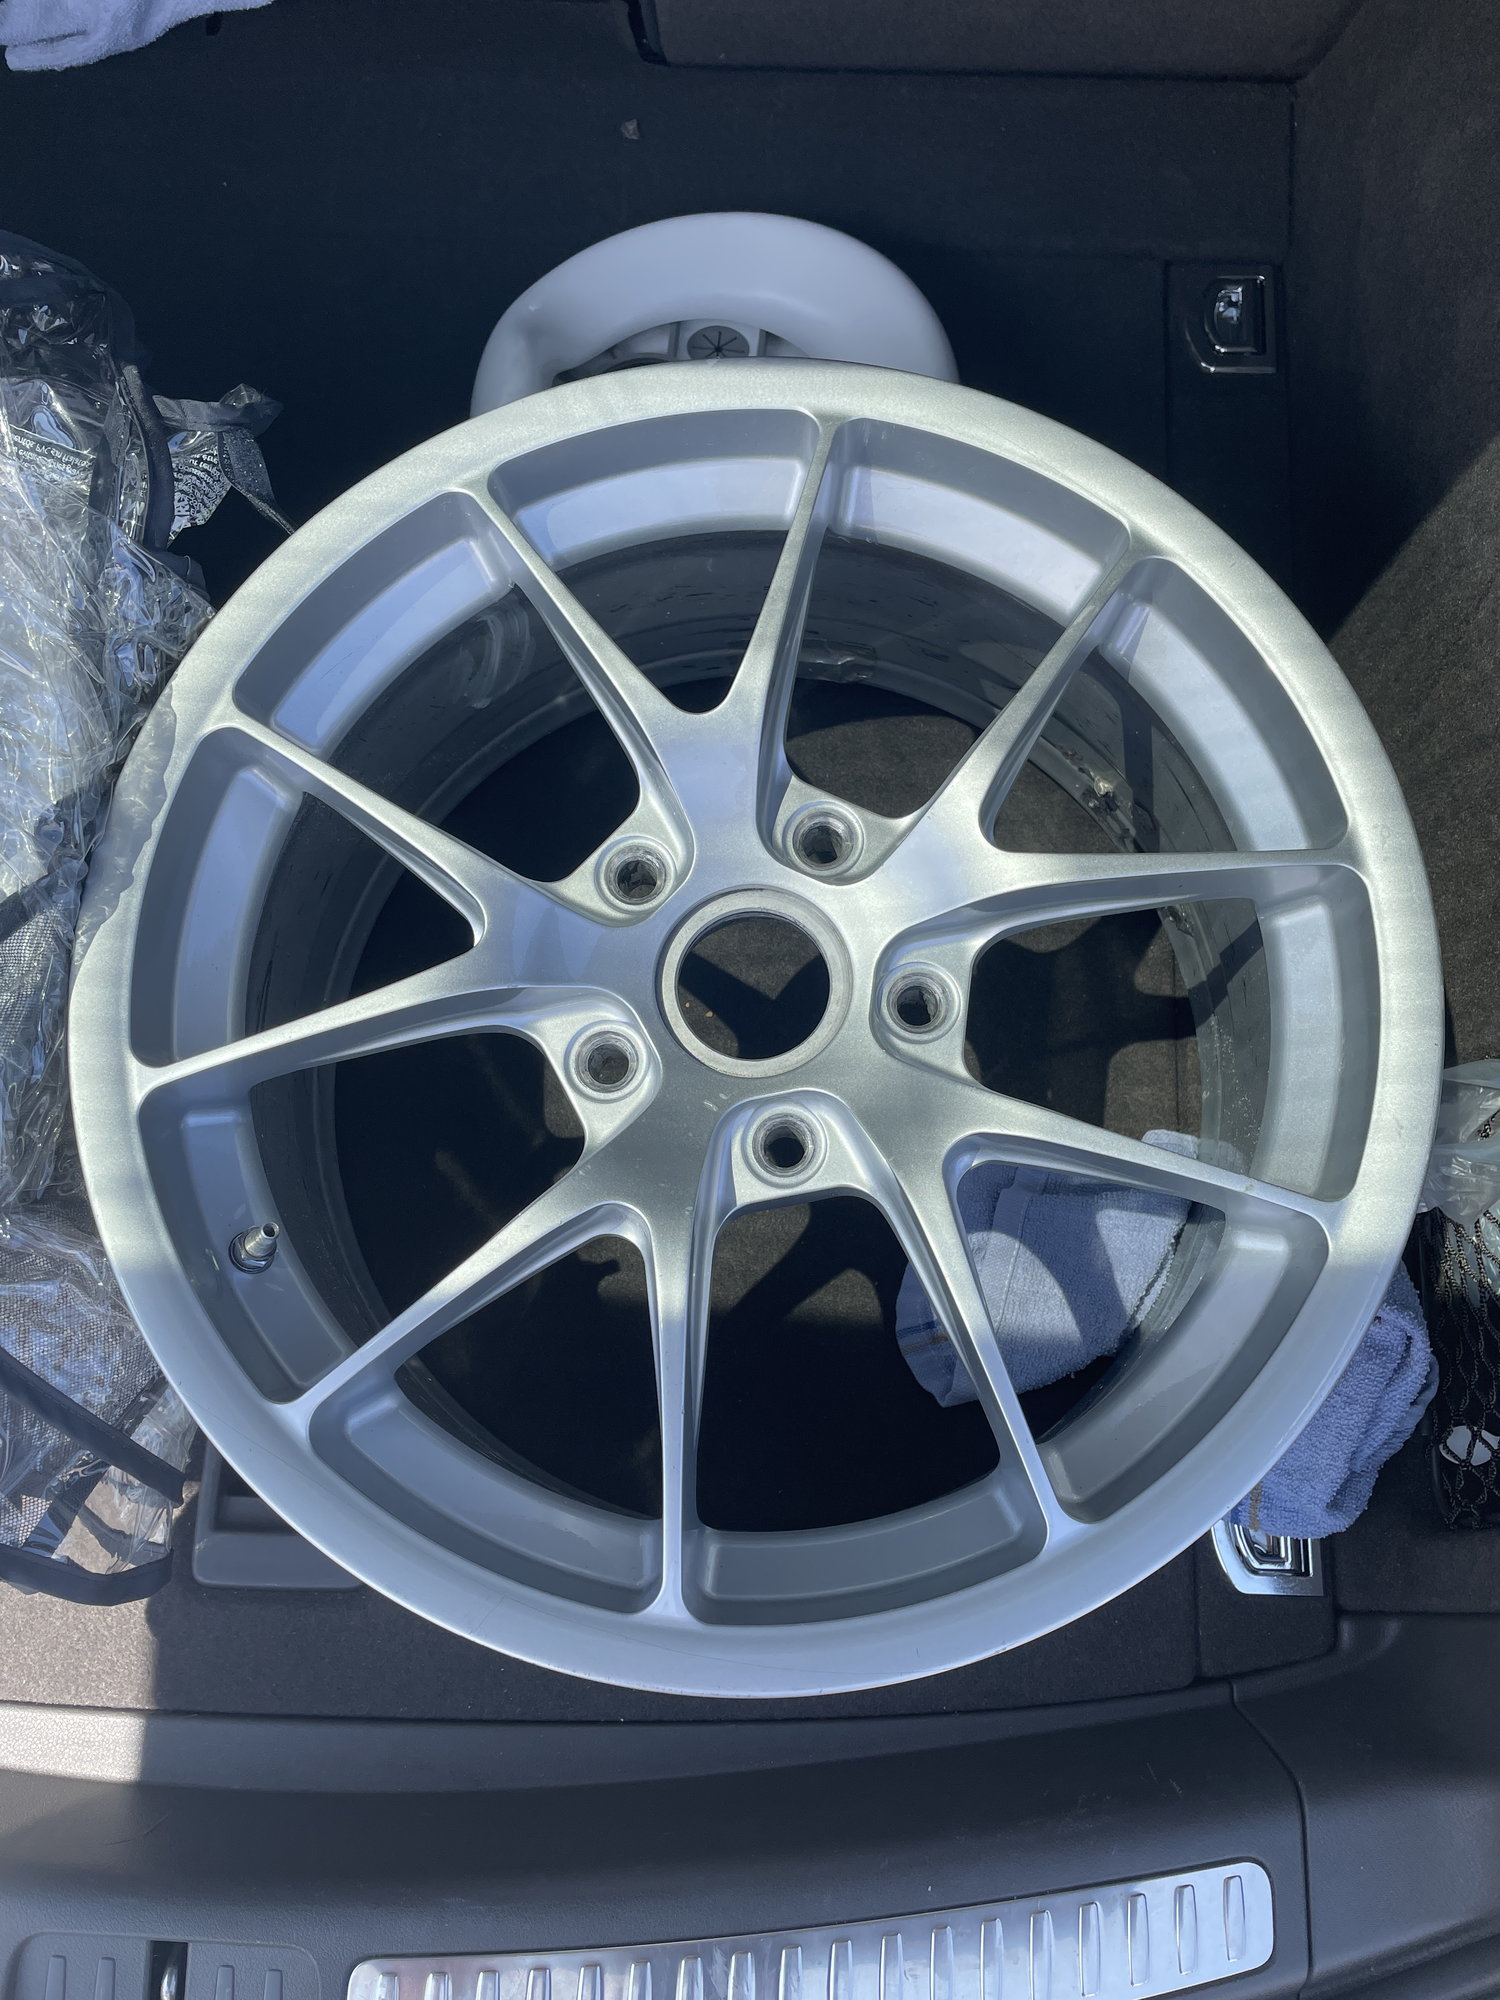 Wheels and Tires/Axles - FS: GT4 Clubsport wheel set - Used - 2016 to 2021 Porsche Cayman GT4 - Los Angeles, CA 90065, United States